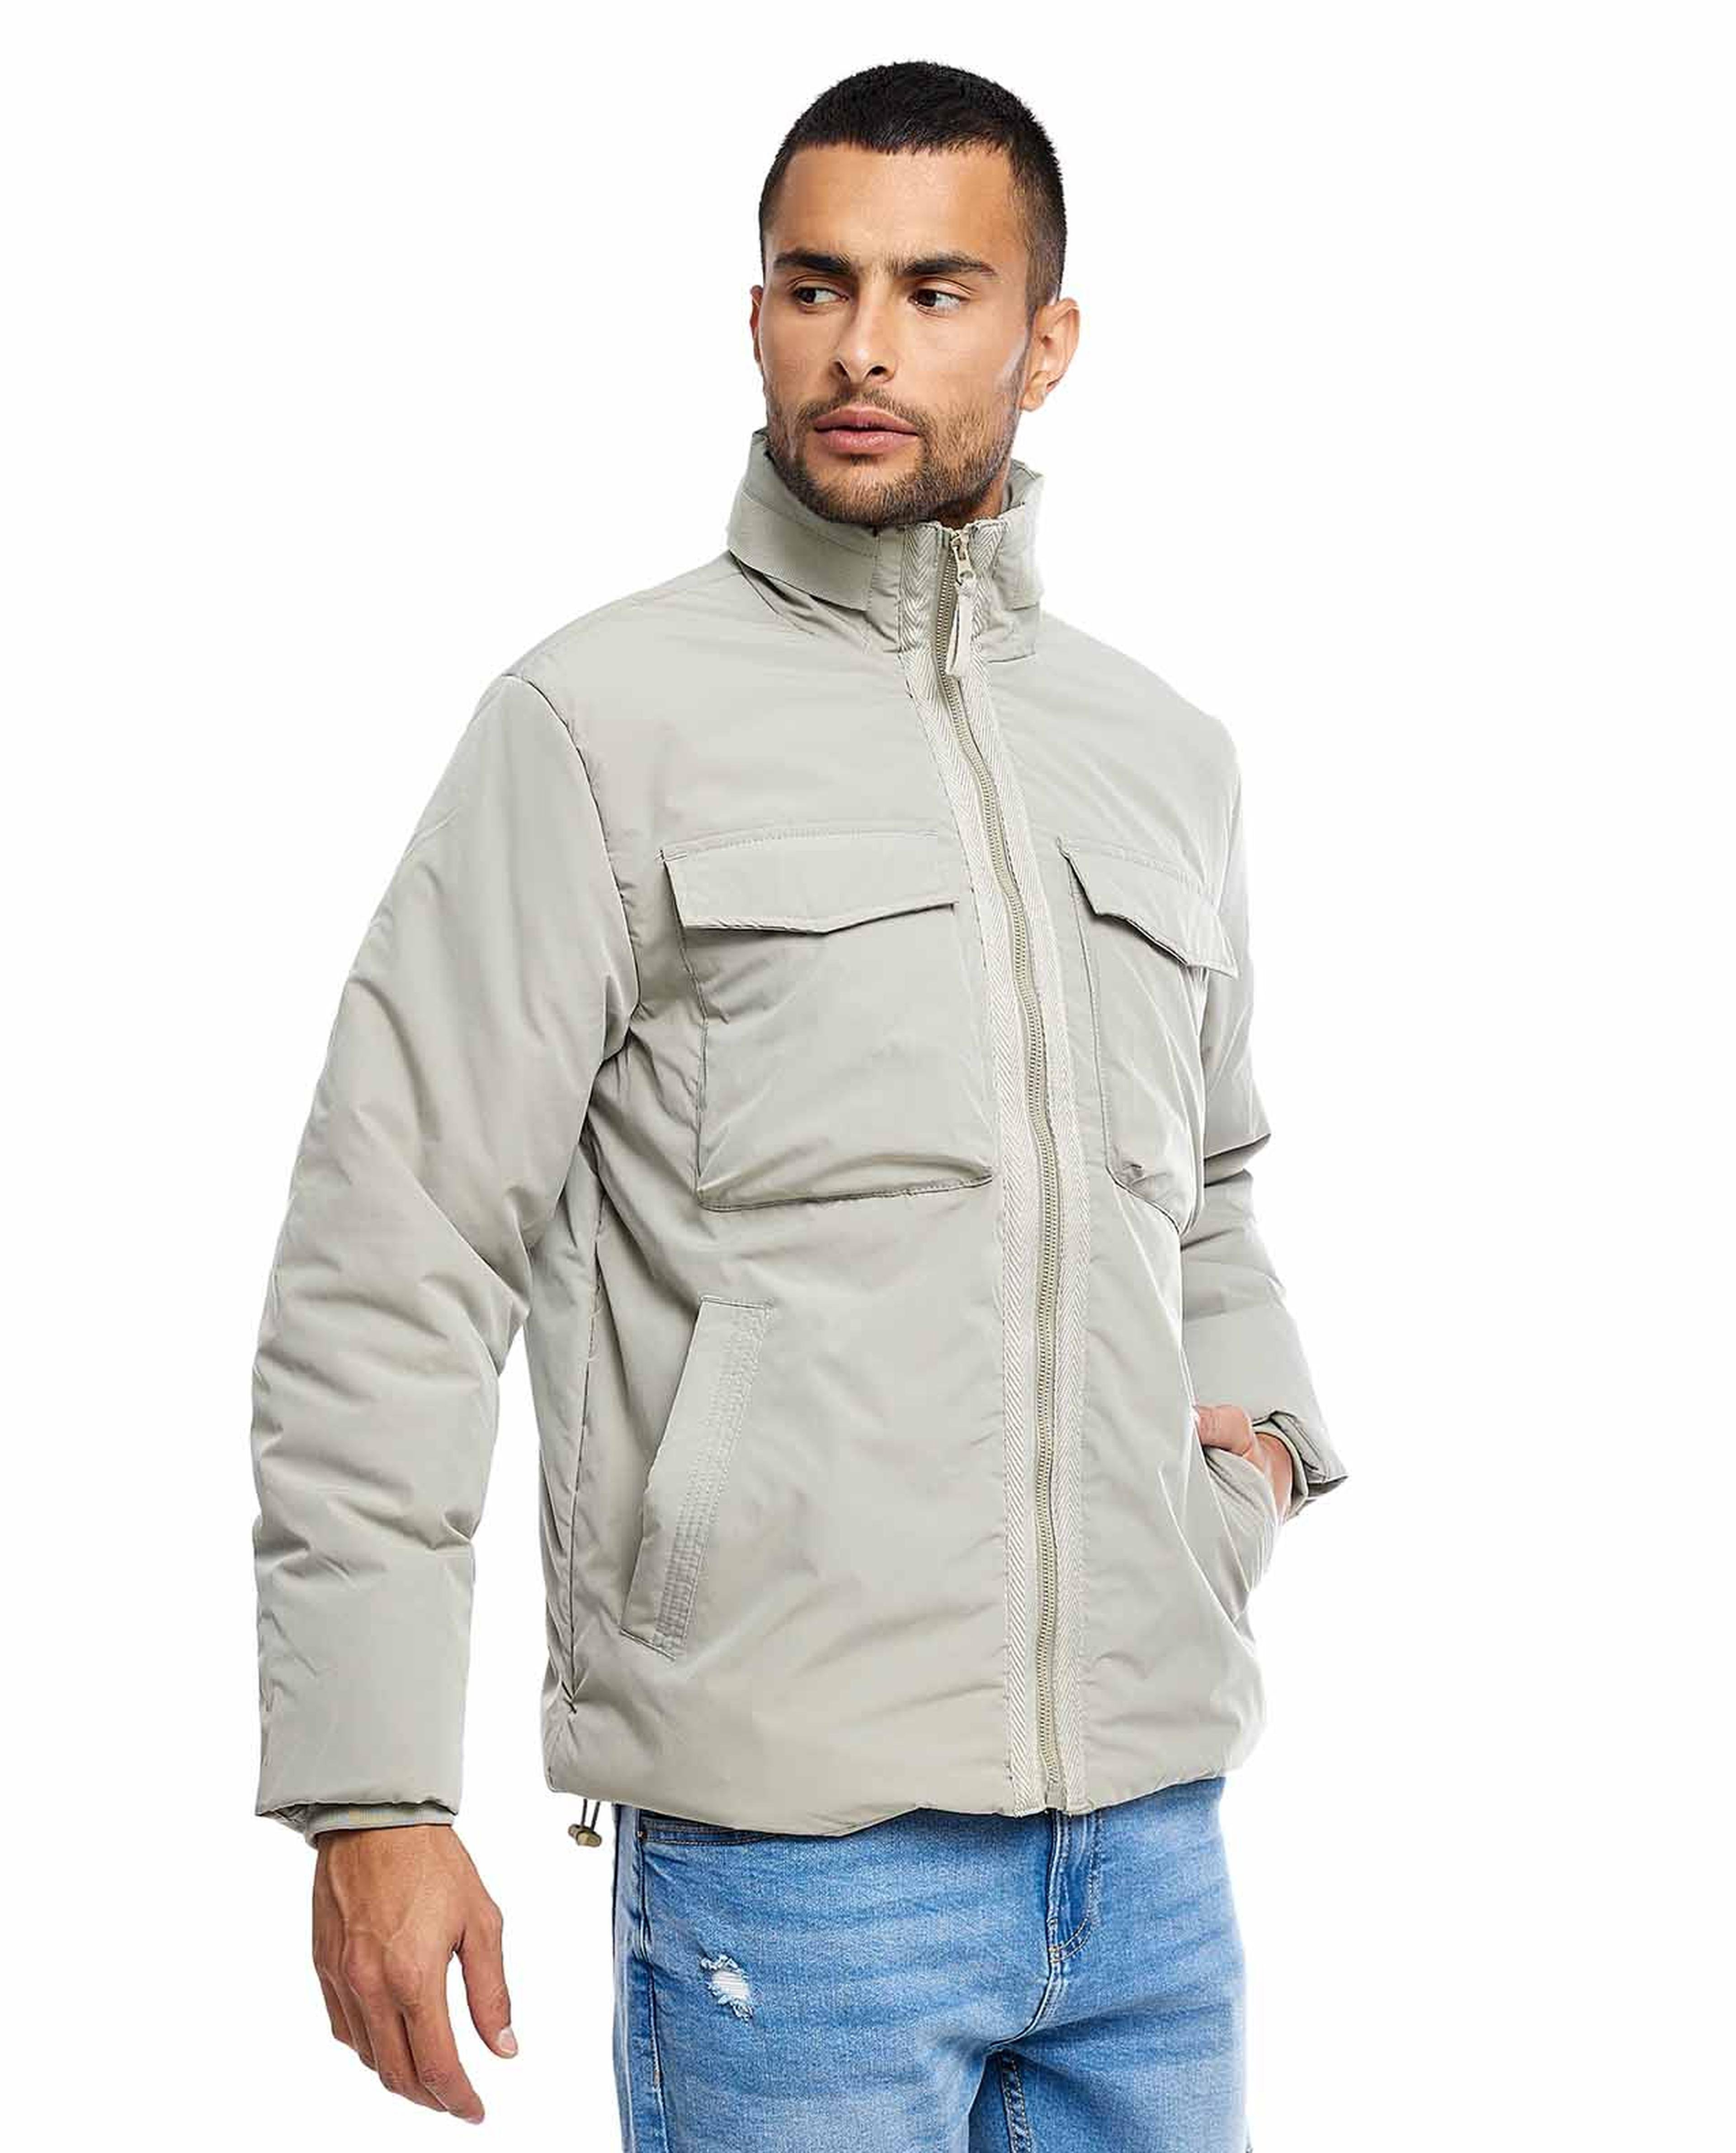 Double Pocket High Neck Jacket with Zipper Closure